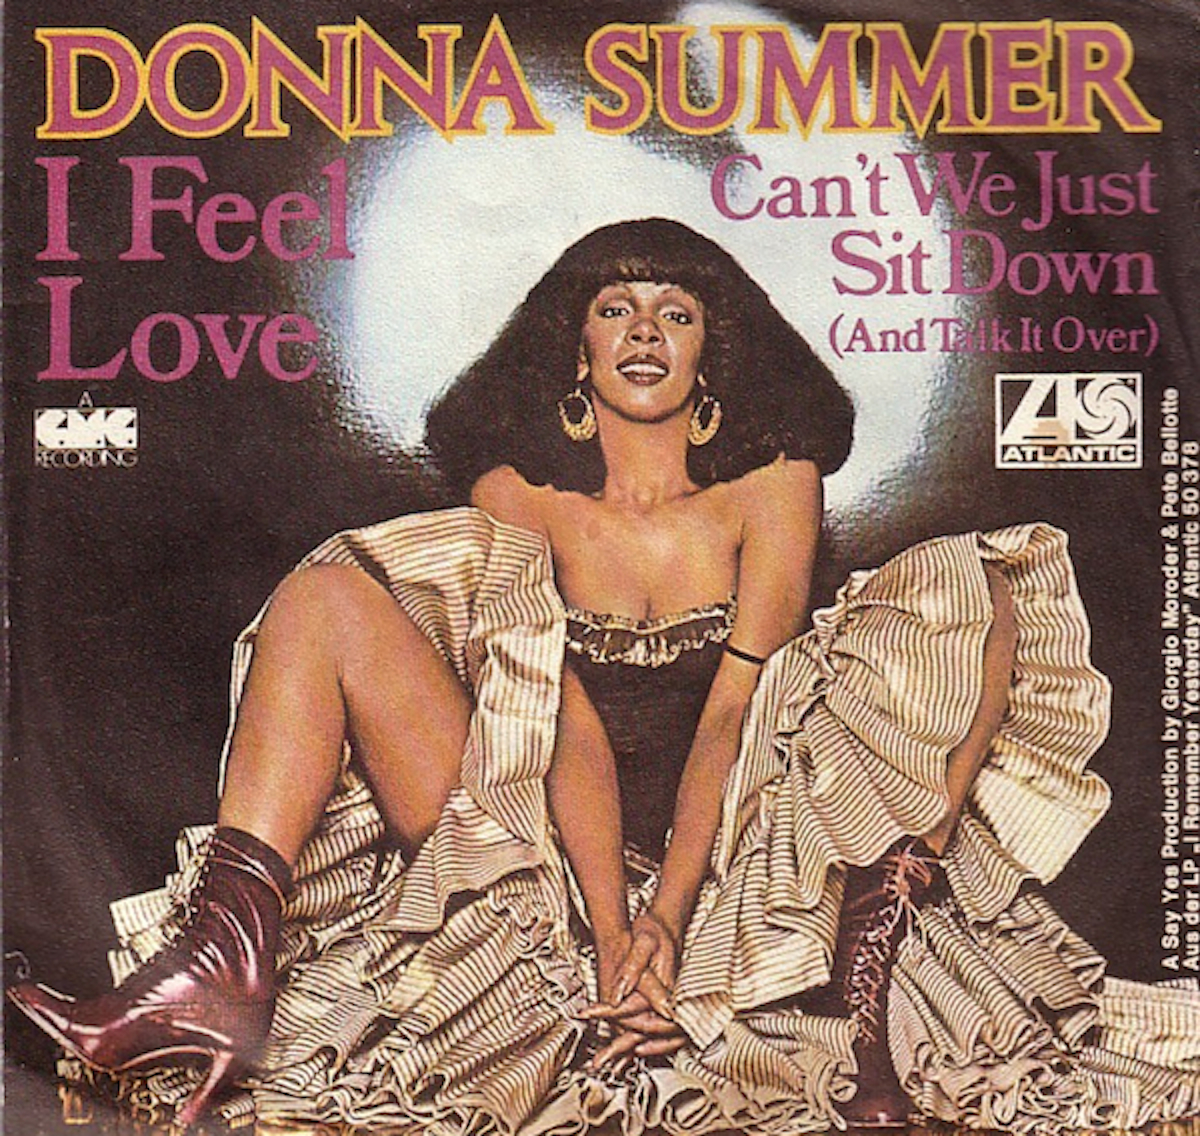 Giorgio Moroder and Pete Bellotte used a Moog synthesizer to help make Donna Summer’s “I Feel Love” a 1977 disco hit.